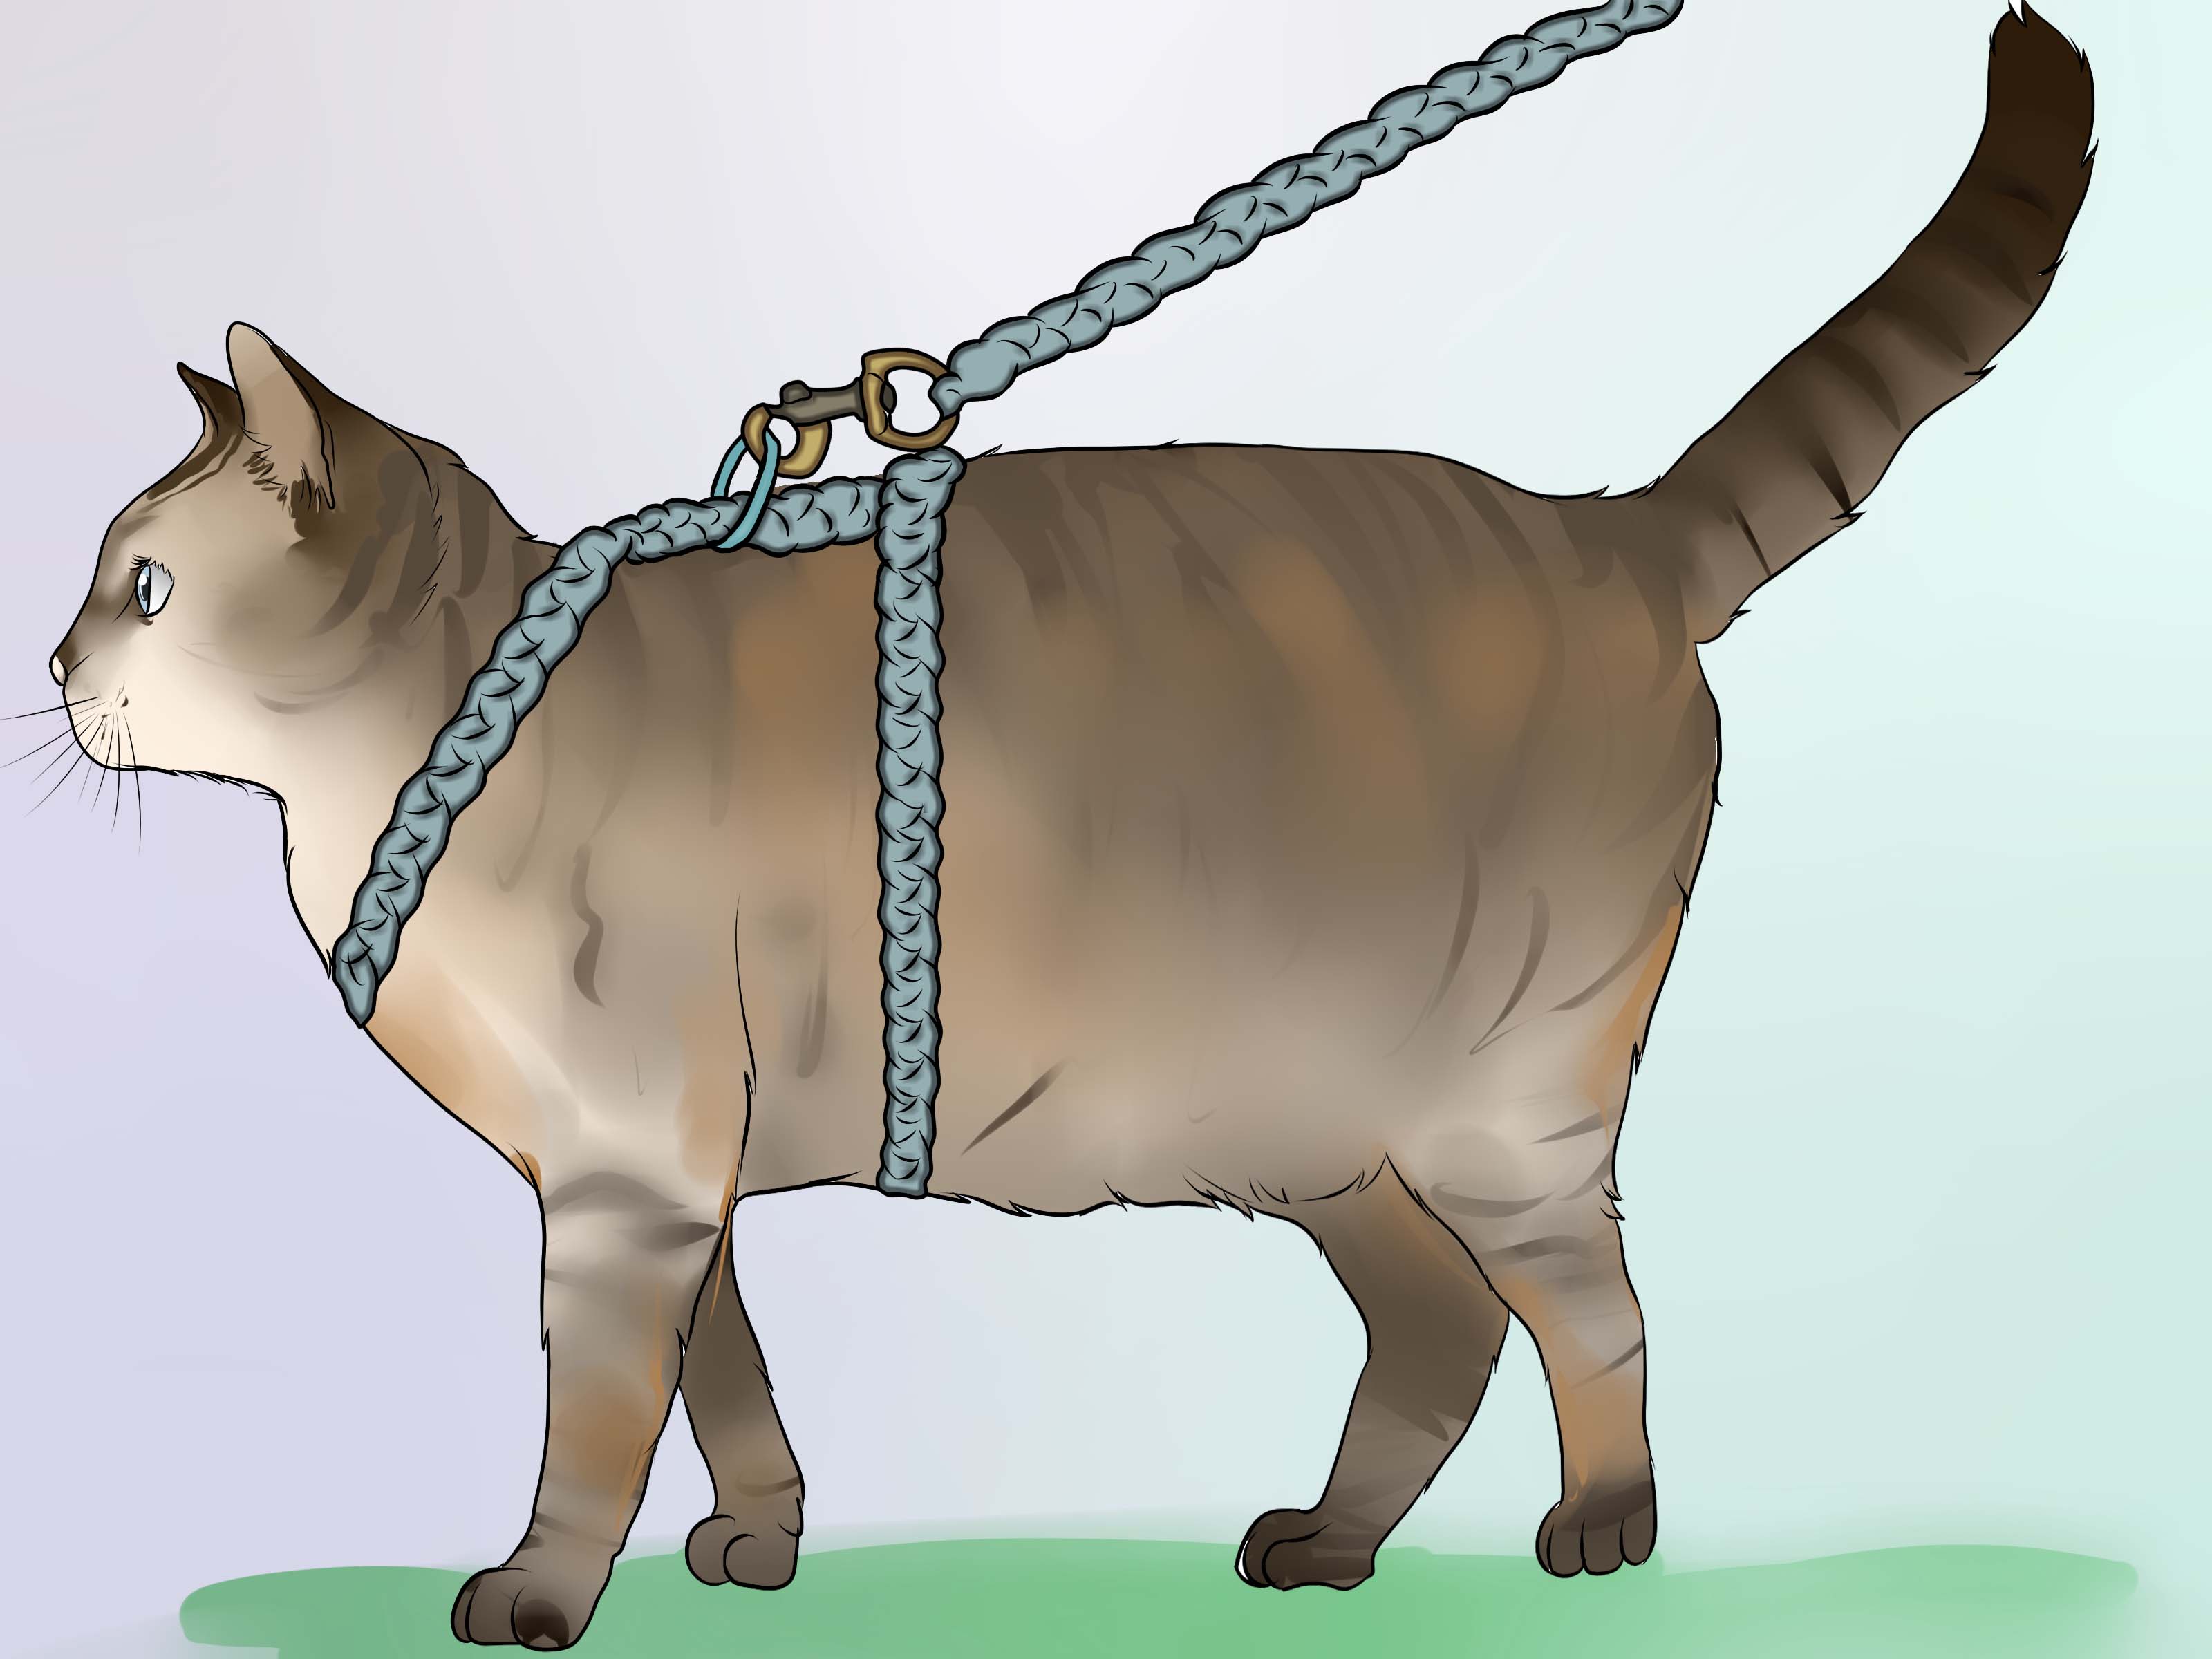 Image Titled Make A Harness For Your Fat Cat Step - Harness On A Cat - HD Wallpaper 